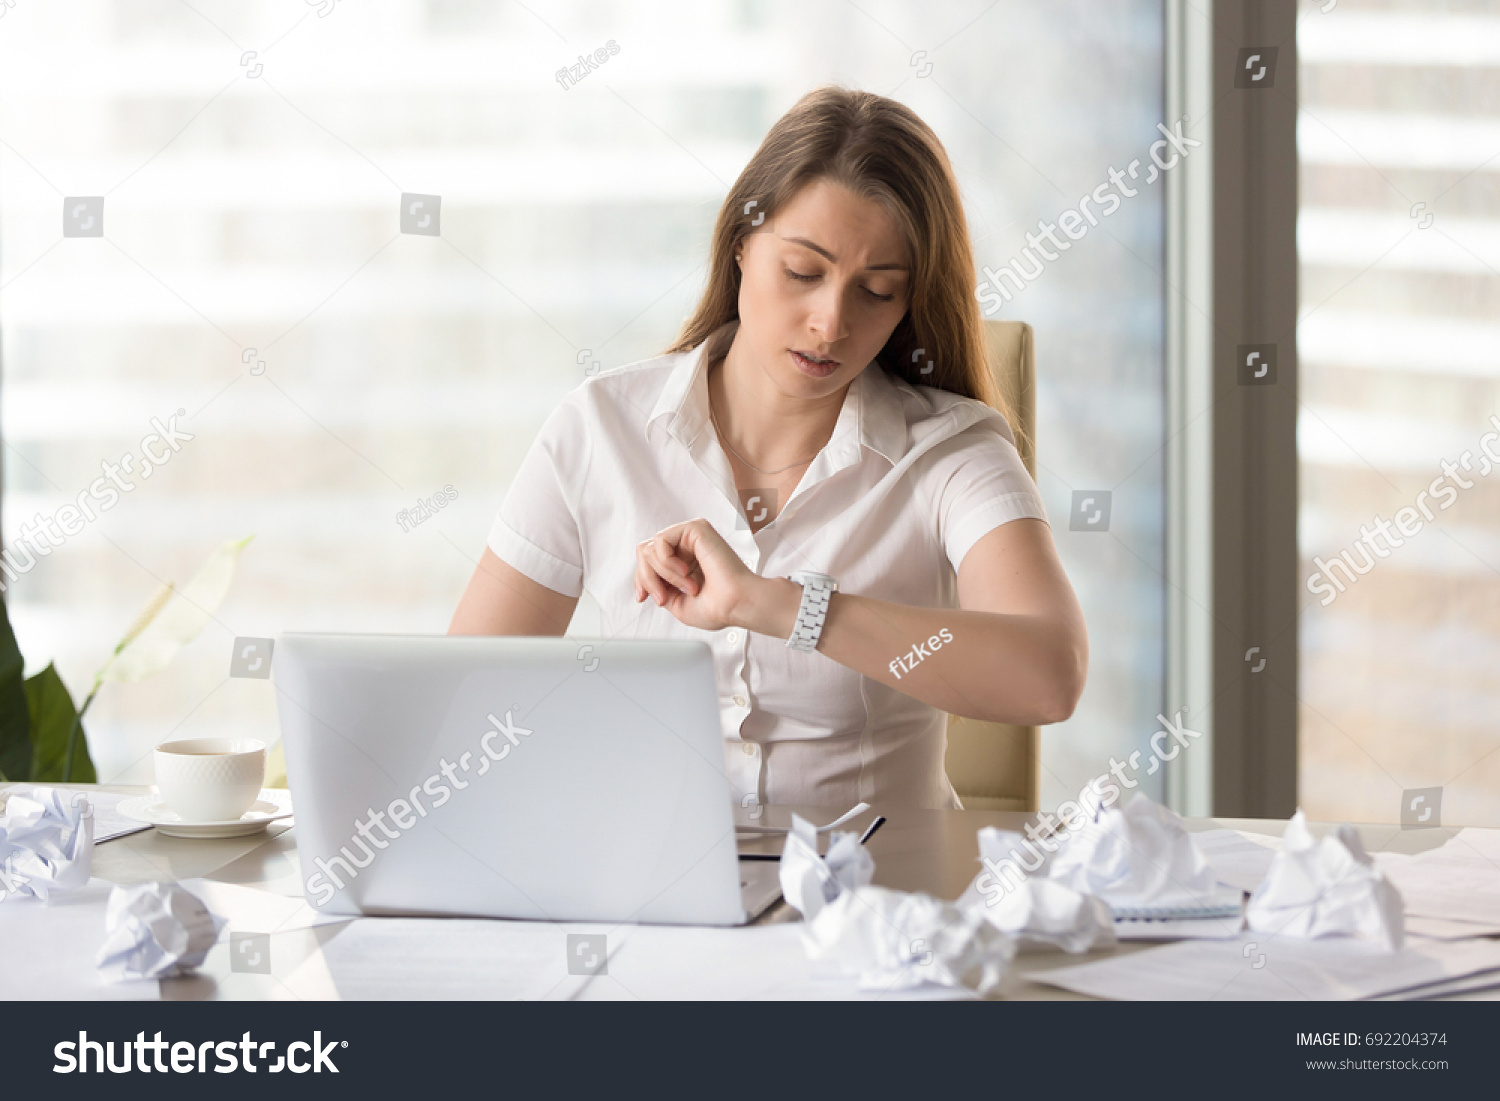 Busy punctual businesswoman checking time to deadline, looking at wristwatch while working with laptop and documents, need to finish work on time, counting on overtime bonus, waiting workday ending #692204374